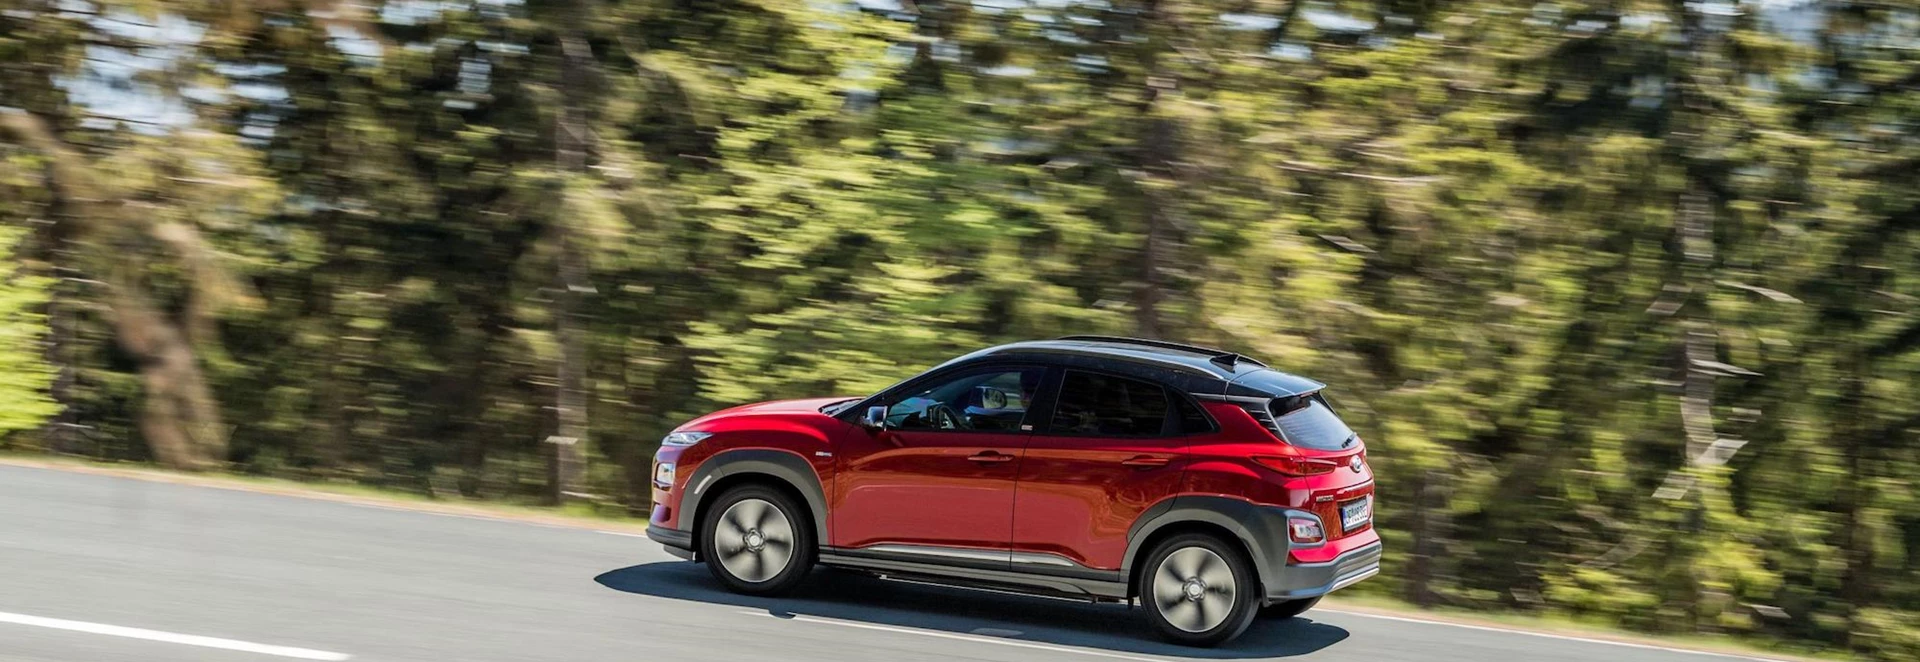 Pricing and specs revealed for Hyundai Kona Electric